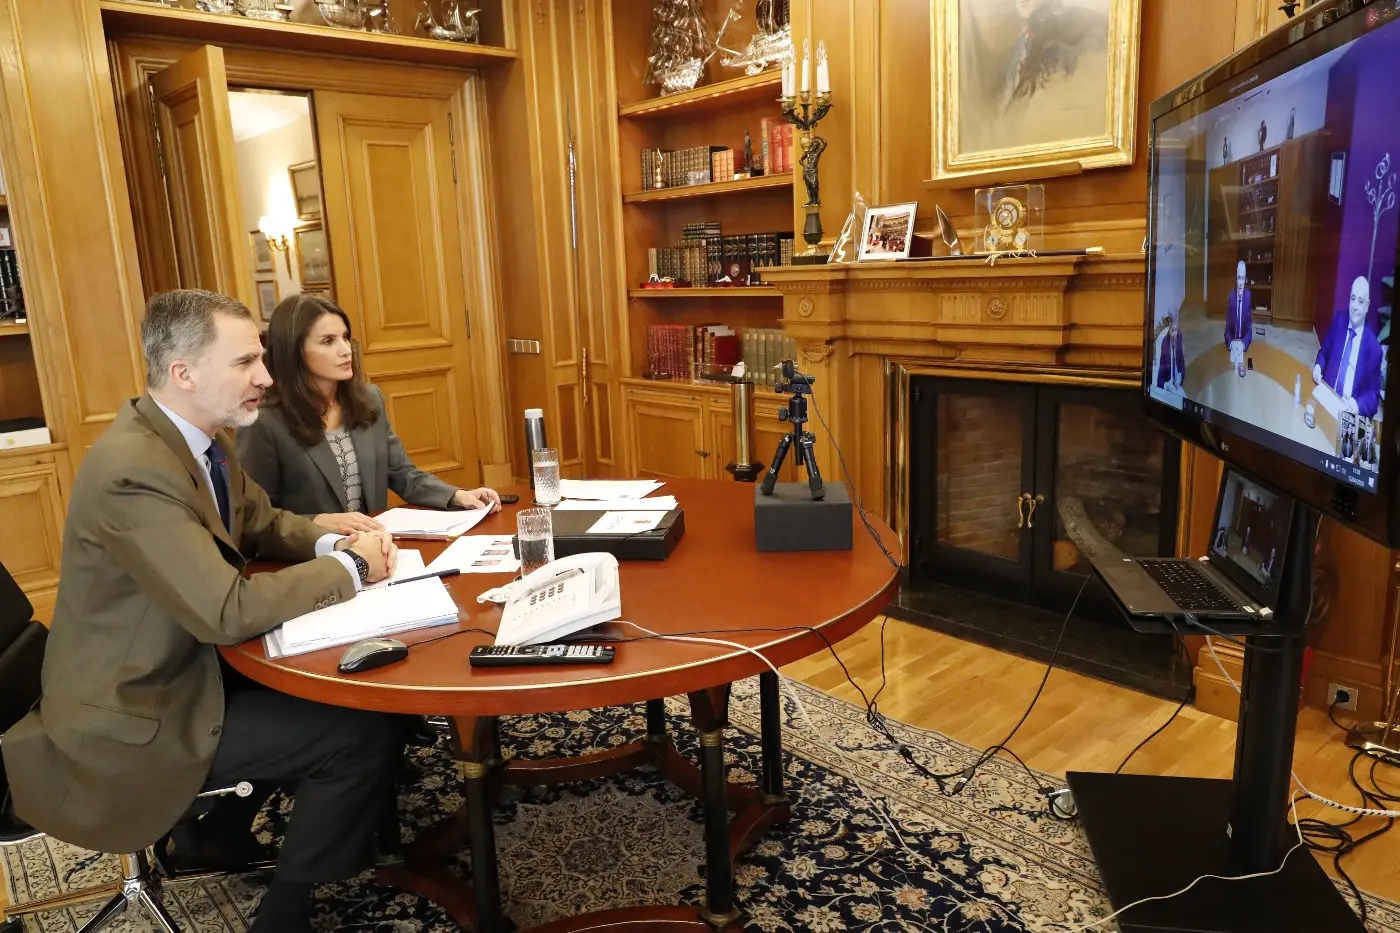 Queen Letizia and King Felipe held a dialogue with the top managers of RENFE through a videoconference